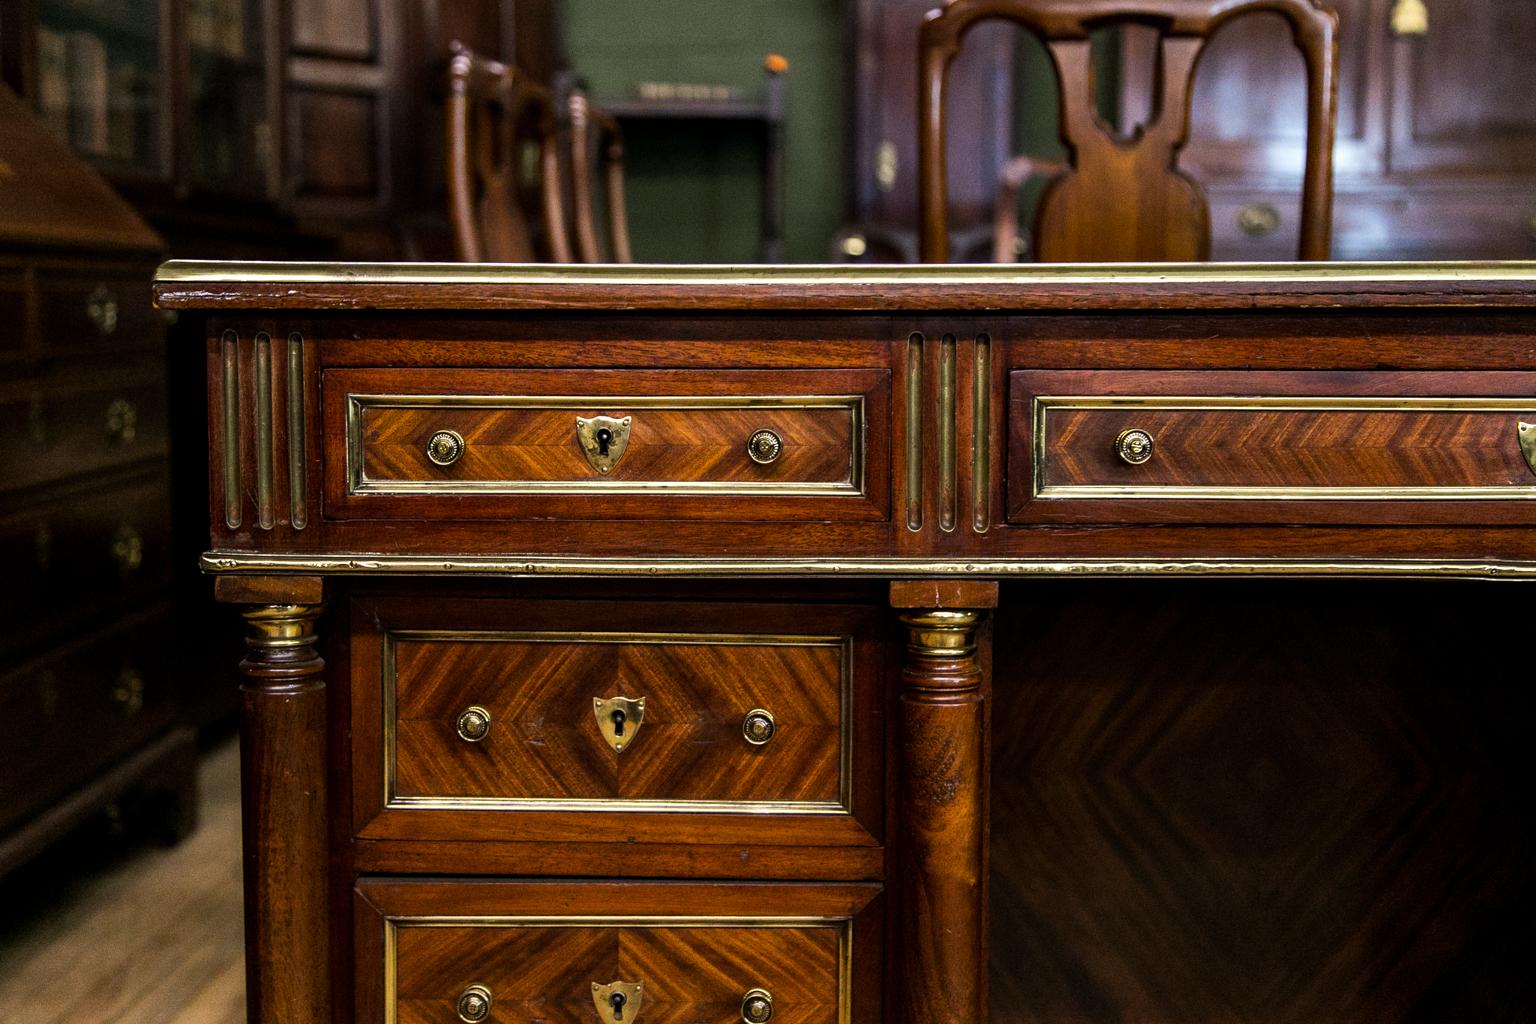 This French writing desk has a bookmatched mahogany top, drawer fronts, sides, back panels, and the interior of the knee hole. It is overlaid with brass moldings on all four sides. The top has a green, gold, and blind tooled leather top with pull